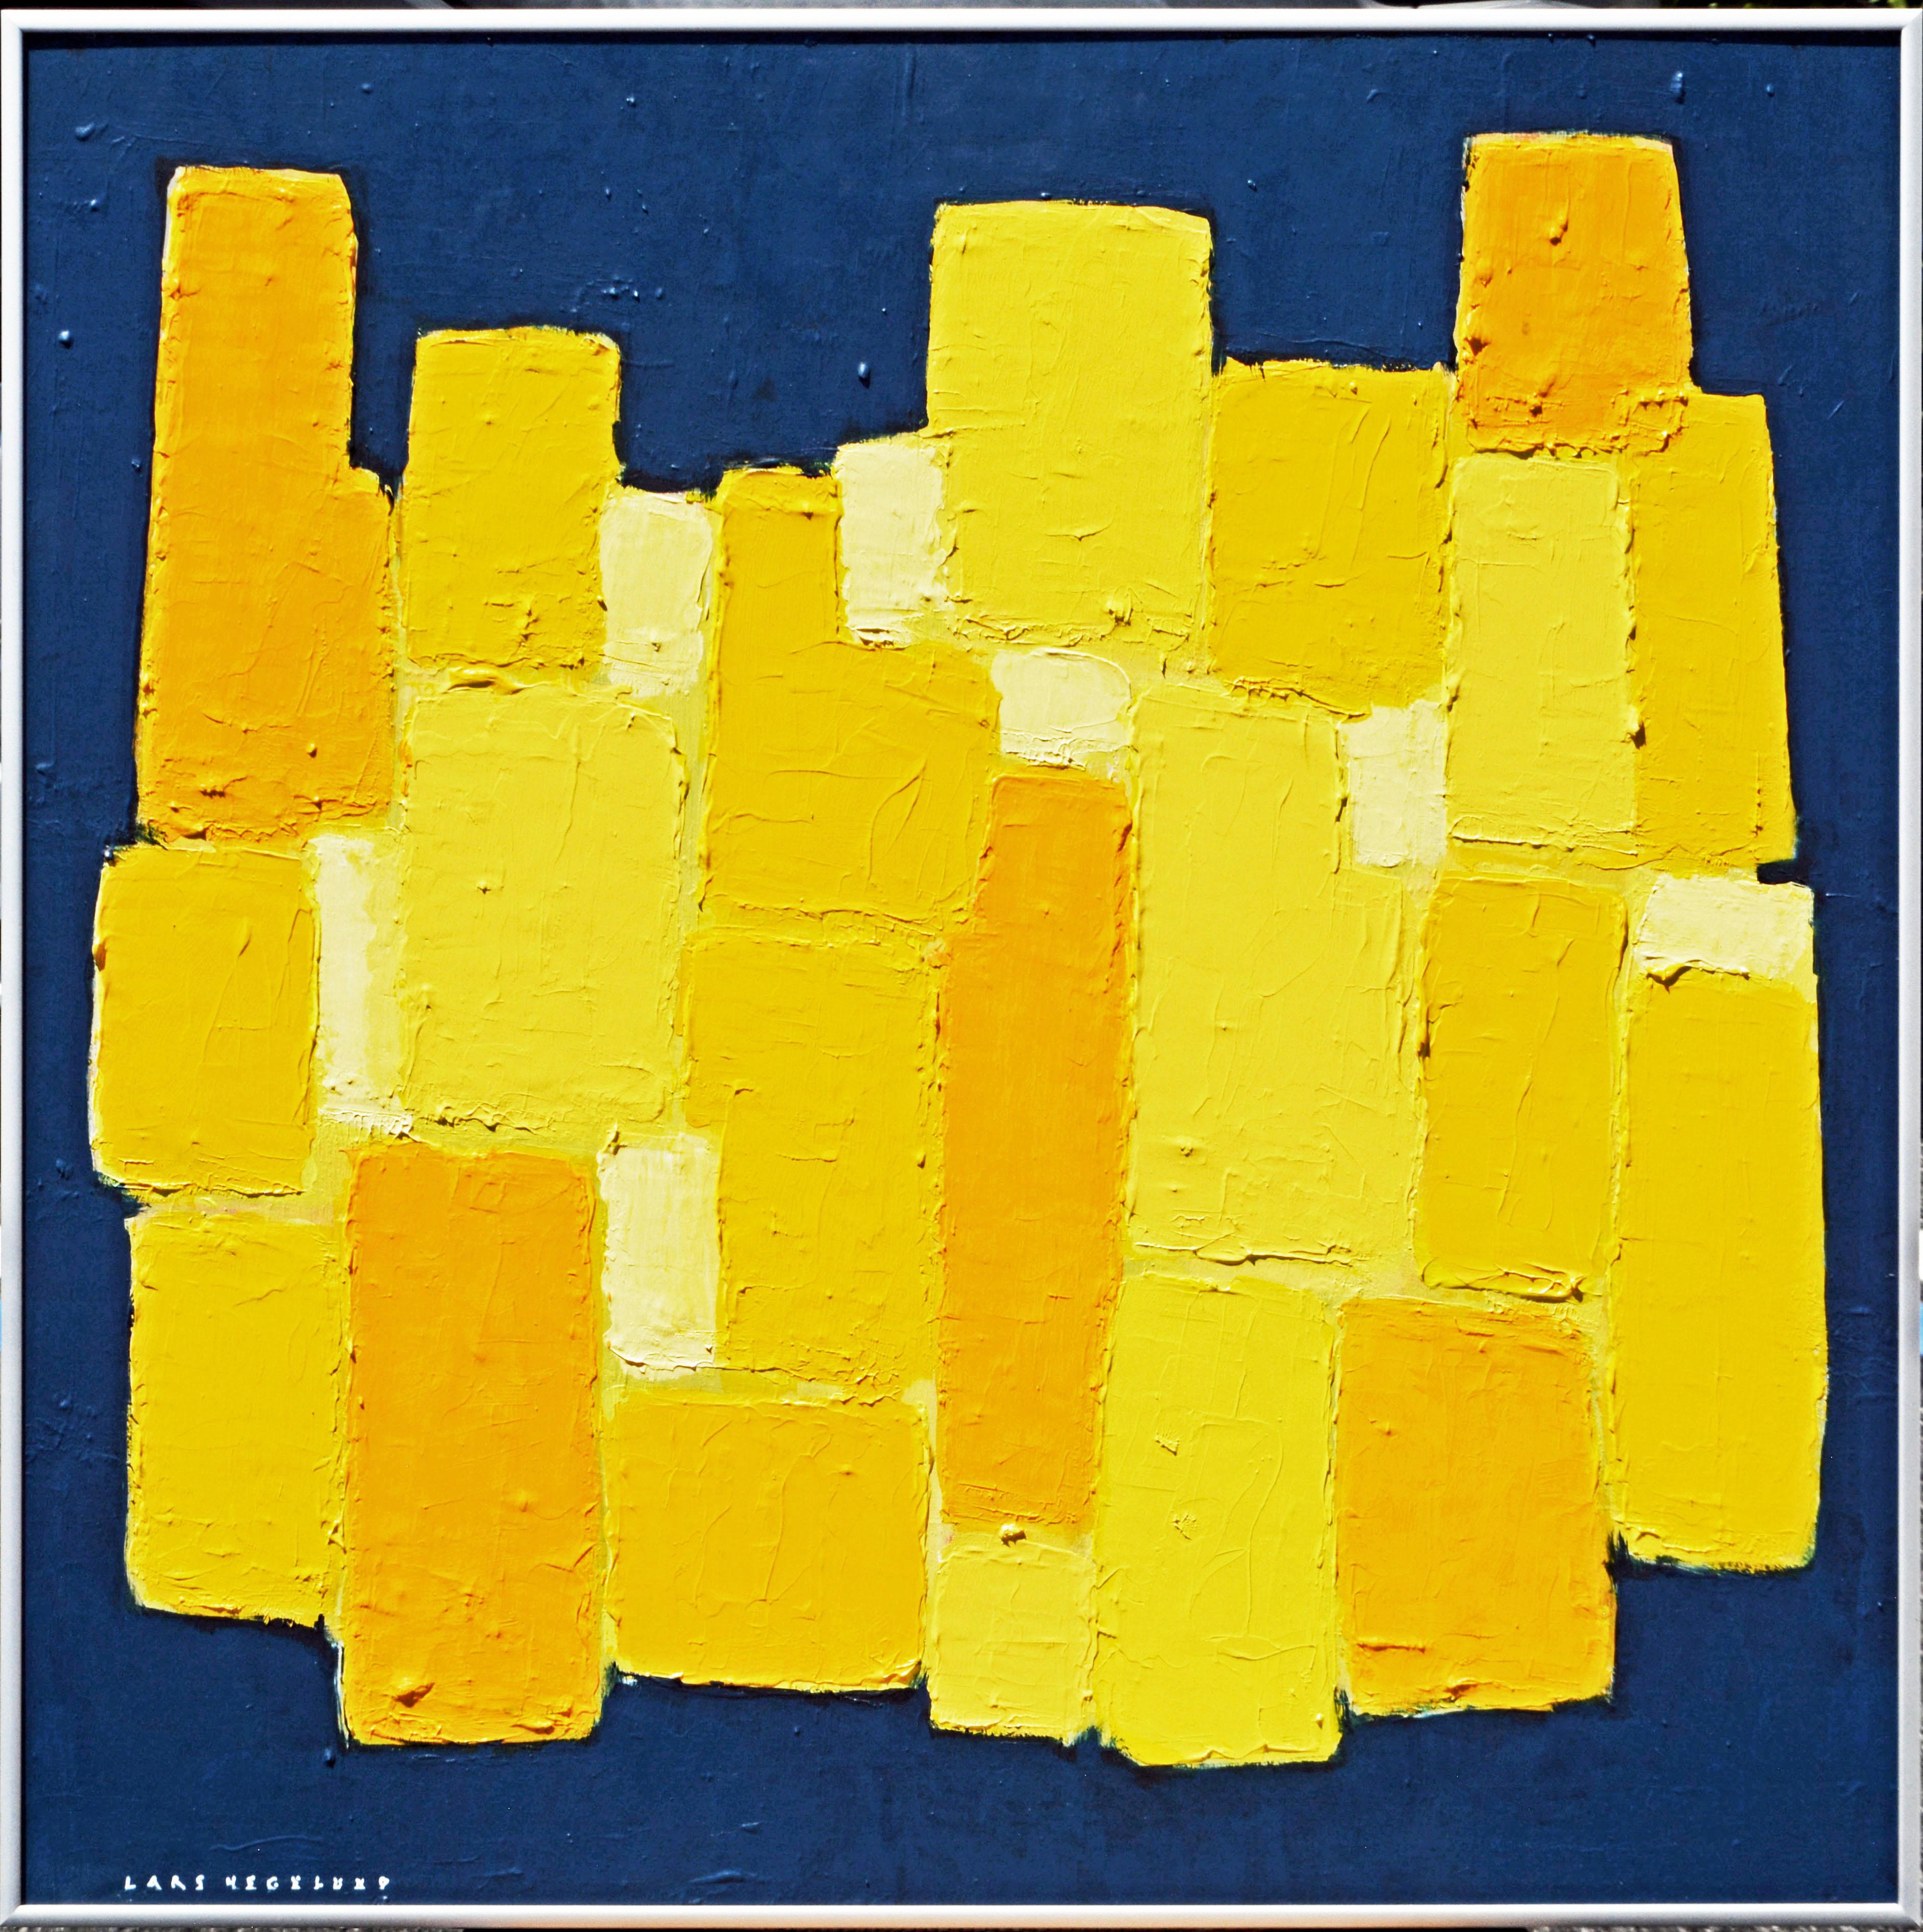 Sometimes less is more. This work is all about color, texture and a composition that stays alive.

'Composition Jaune sur Fond Bleu'
by Lars Hegelund, American b. 1947.
Acrylic and Oil on Canvas, signed.
Measures: 24 x 24 in. w/o frame, 24.5 x